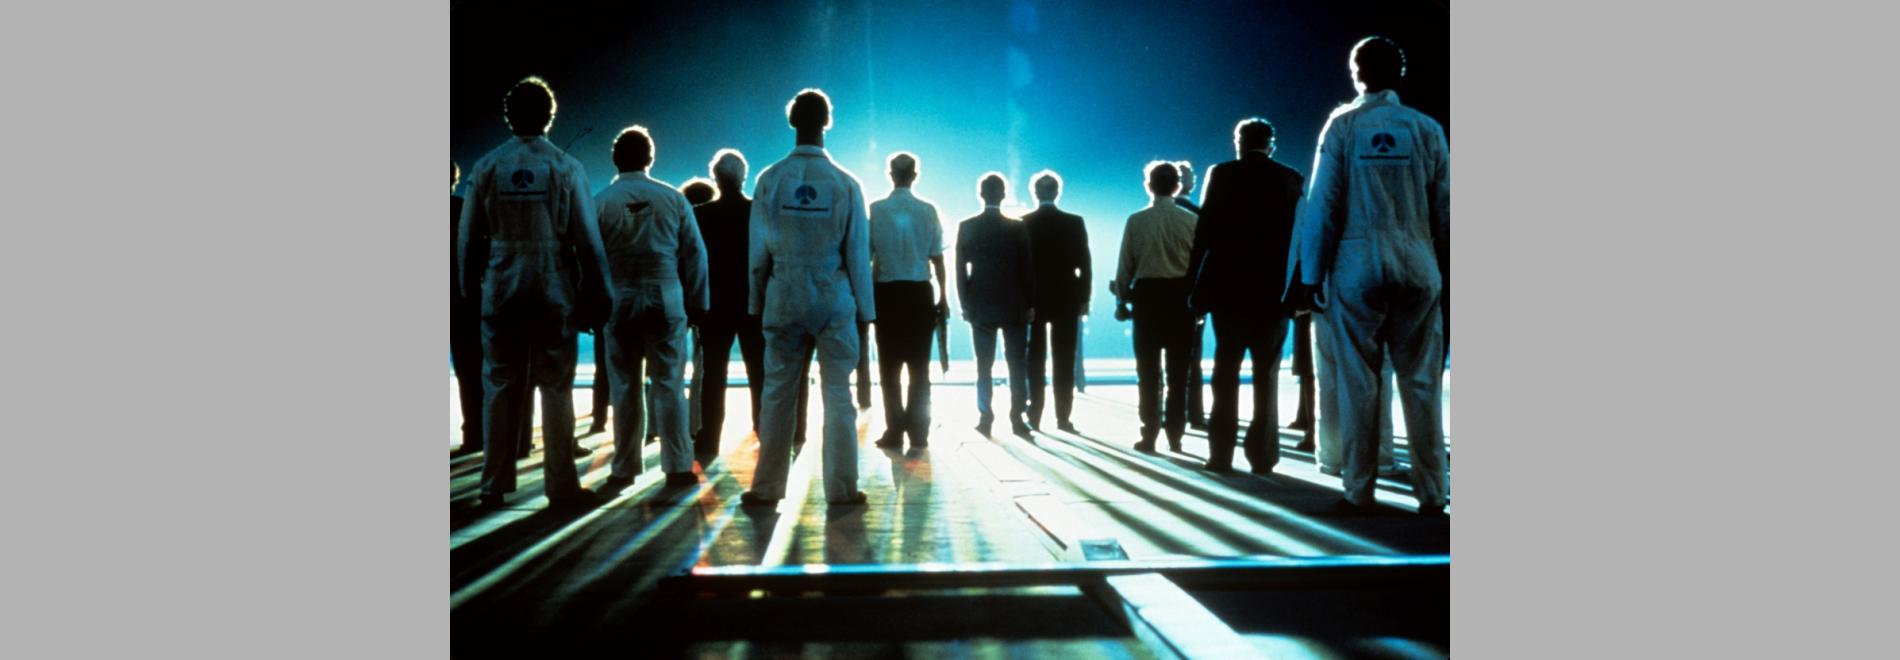 Close Encounters of the Third Kind (Steven Spielberg, 1977)